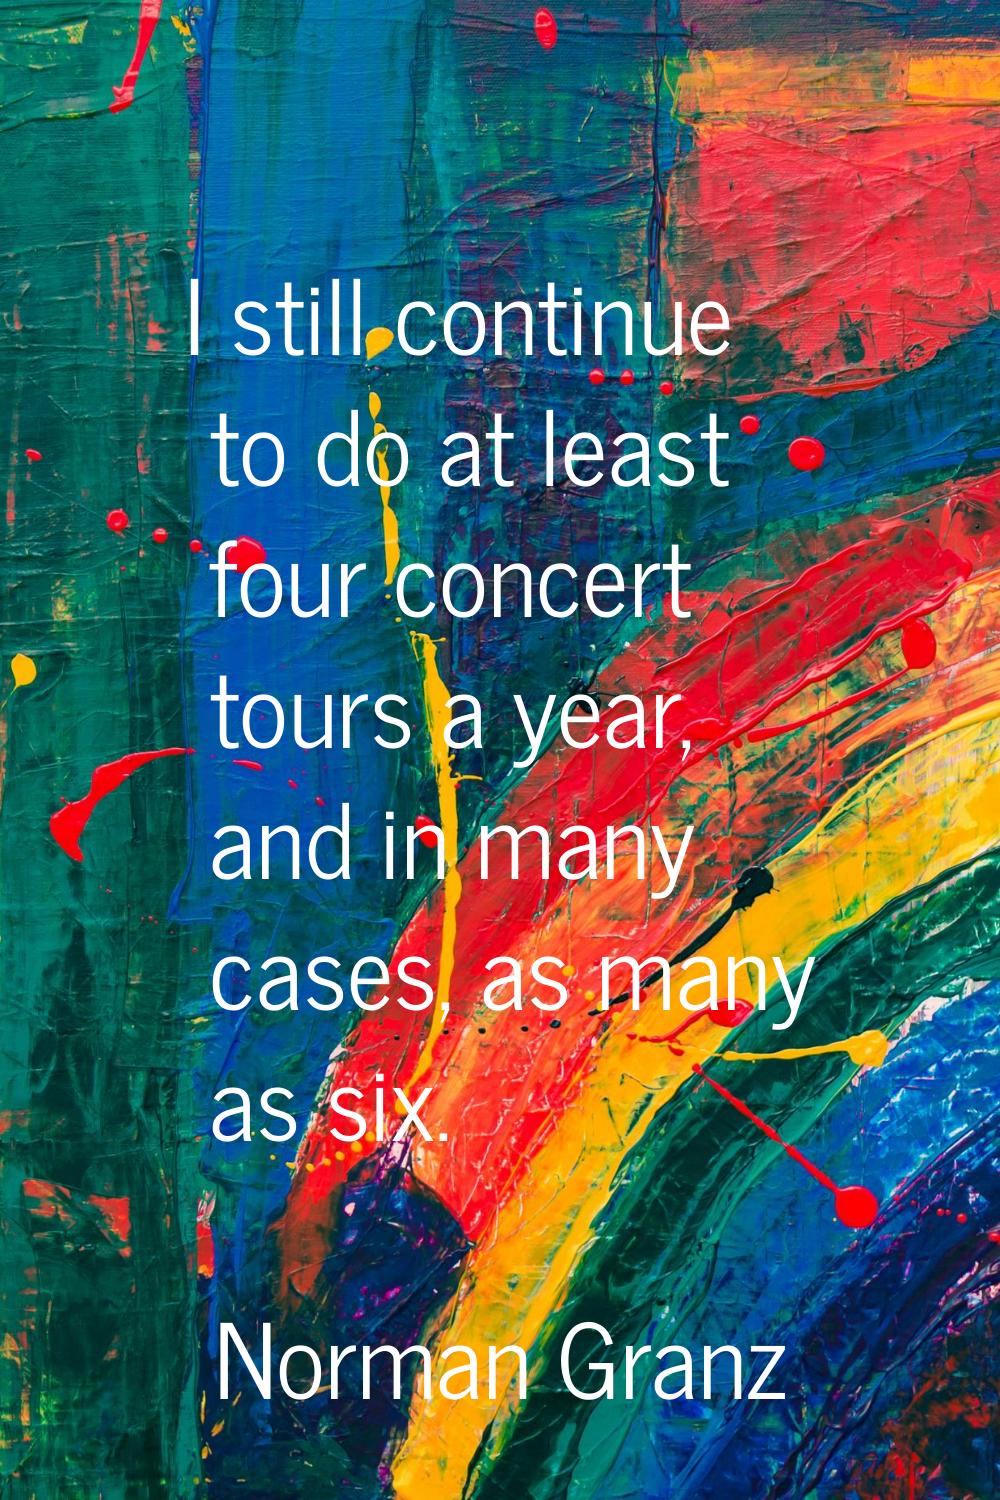 I still continue to do at least four concert tours a year, and in many cases, as many as six.